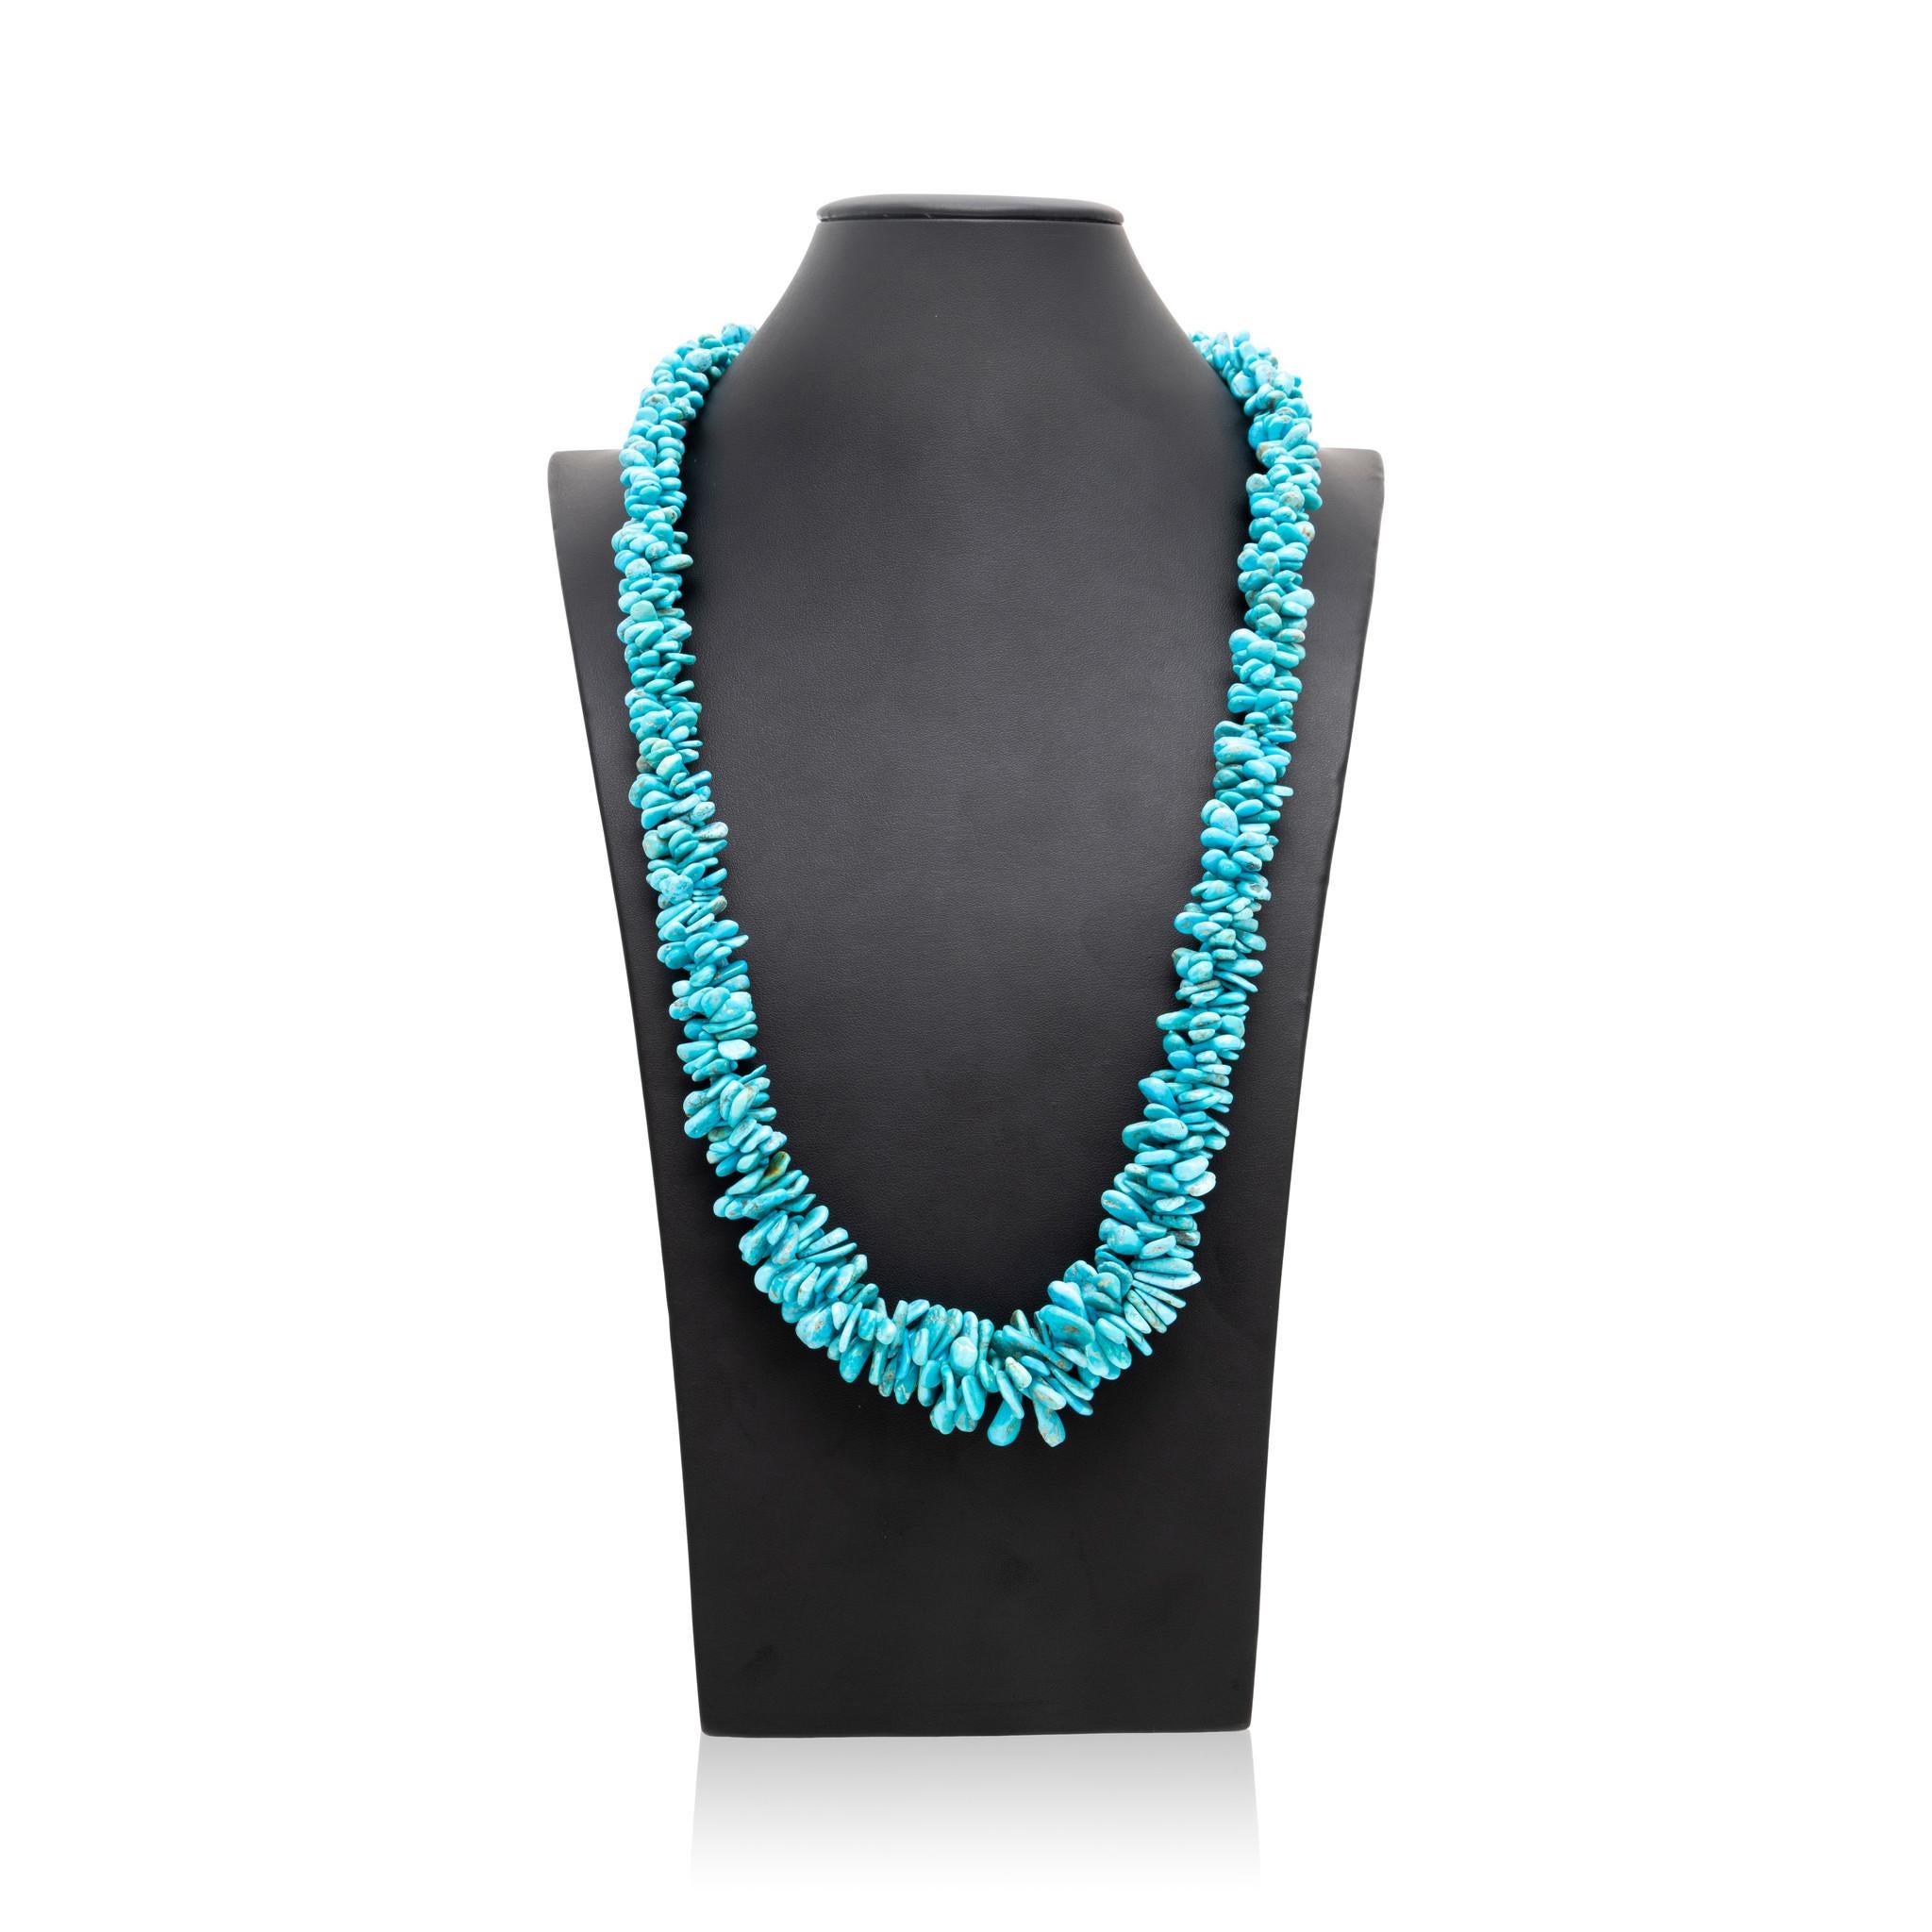 Santo Domingo Turquoise Necklace In Good Condition For Sale In Coeur d Alene, ID